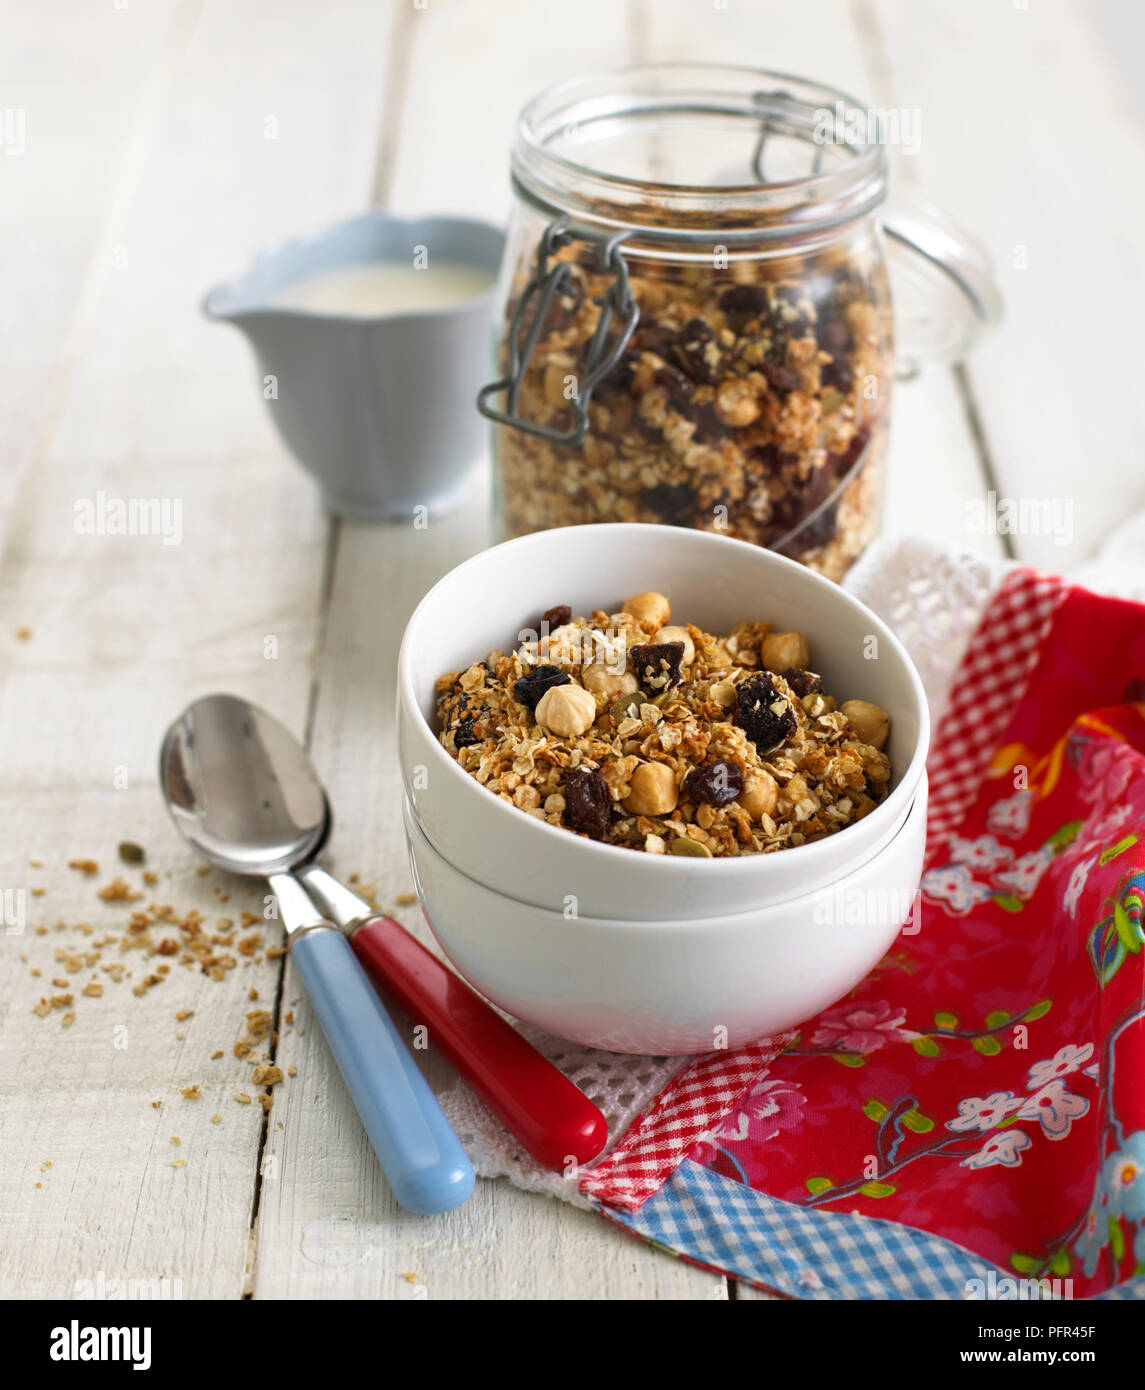 Sealed jar and bowl of fruity breakfast cereal Stock Photo